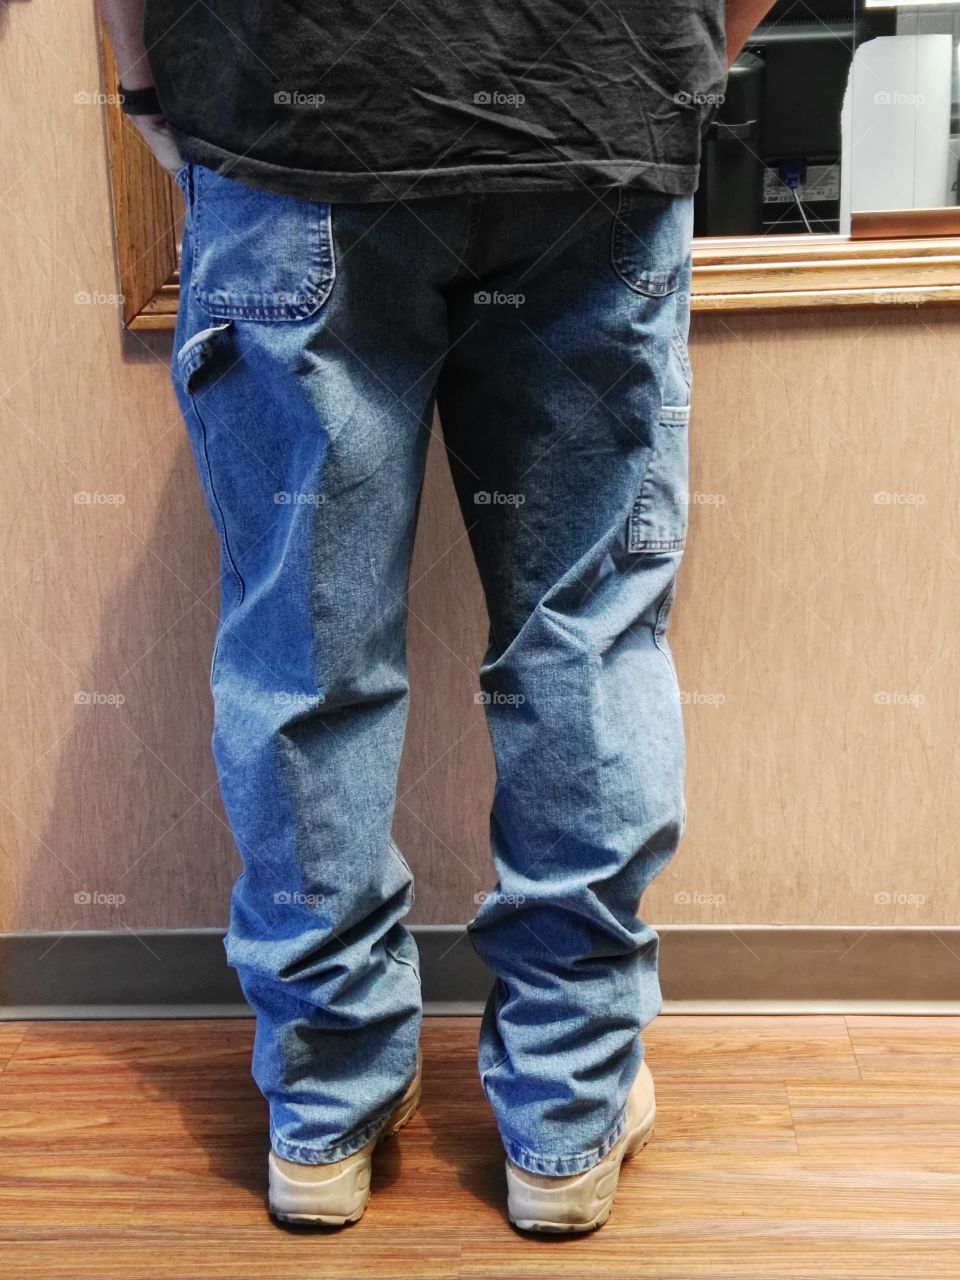 How jeans should be worn